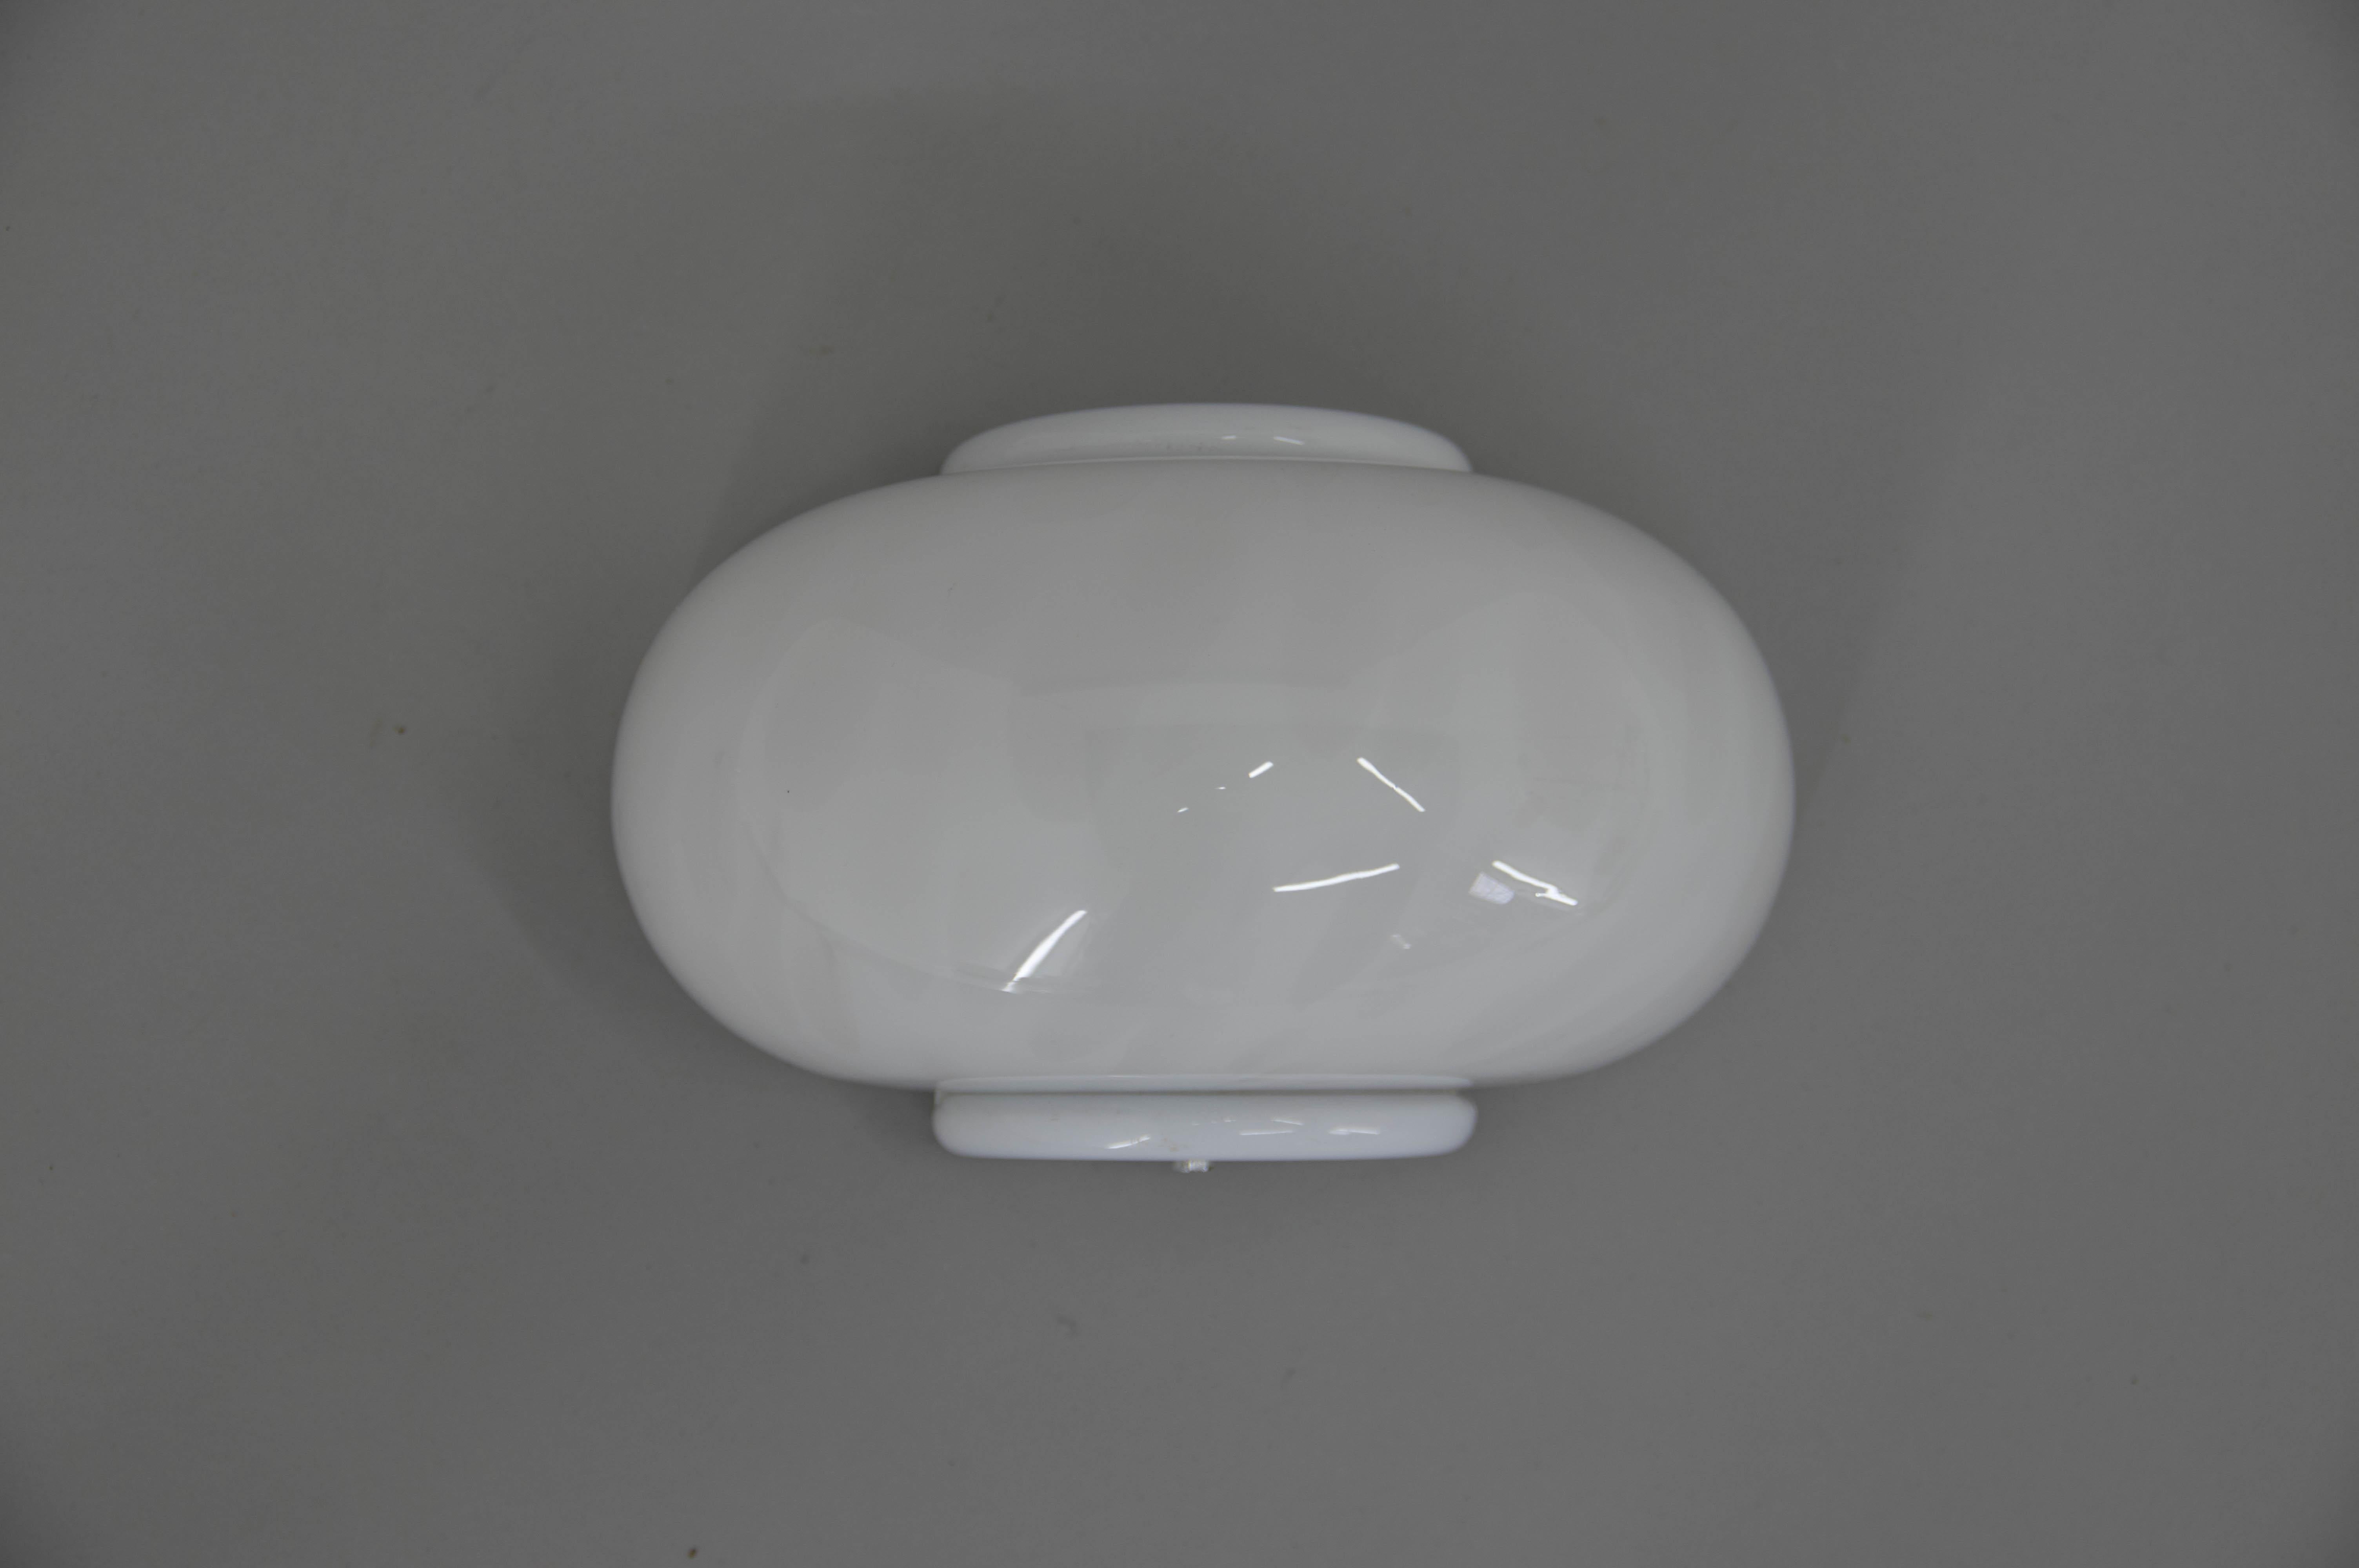 Elegant and simple white wall light.
Glass shade made of two slightly different white glass.
16 pieces available
Price per one item
1x40W, E25-E27 bulb
US wiring compatible.